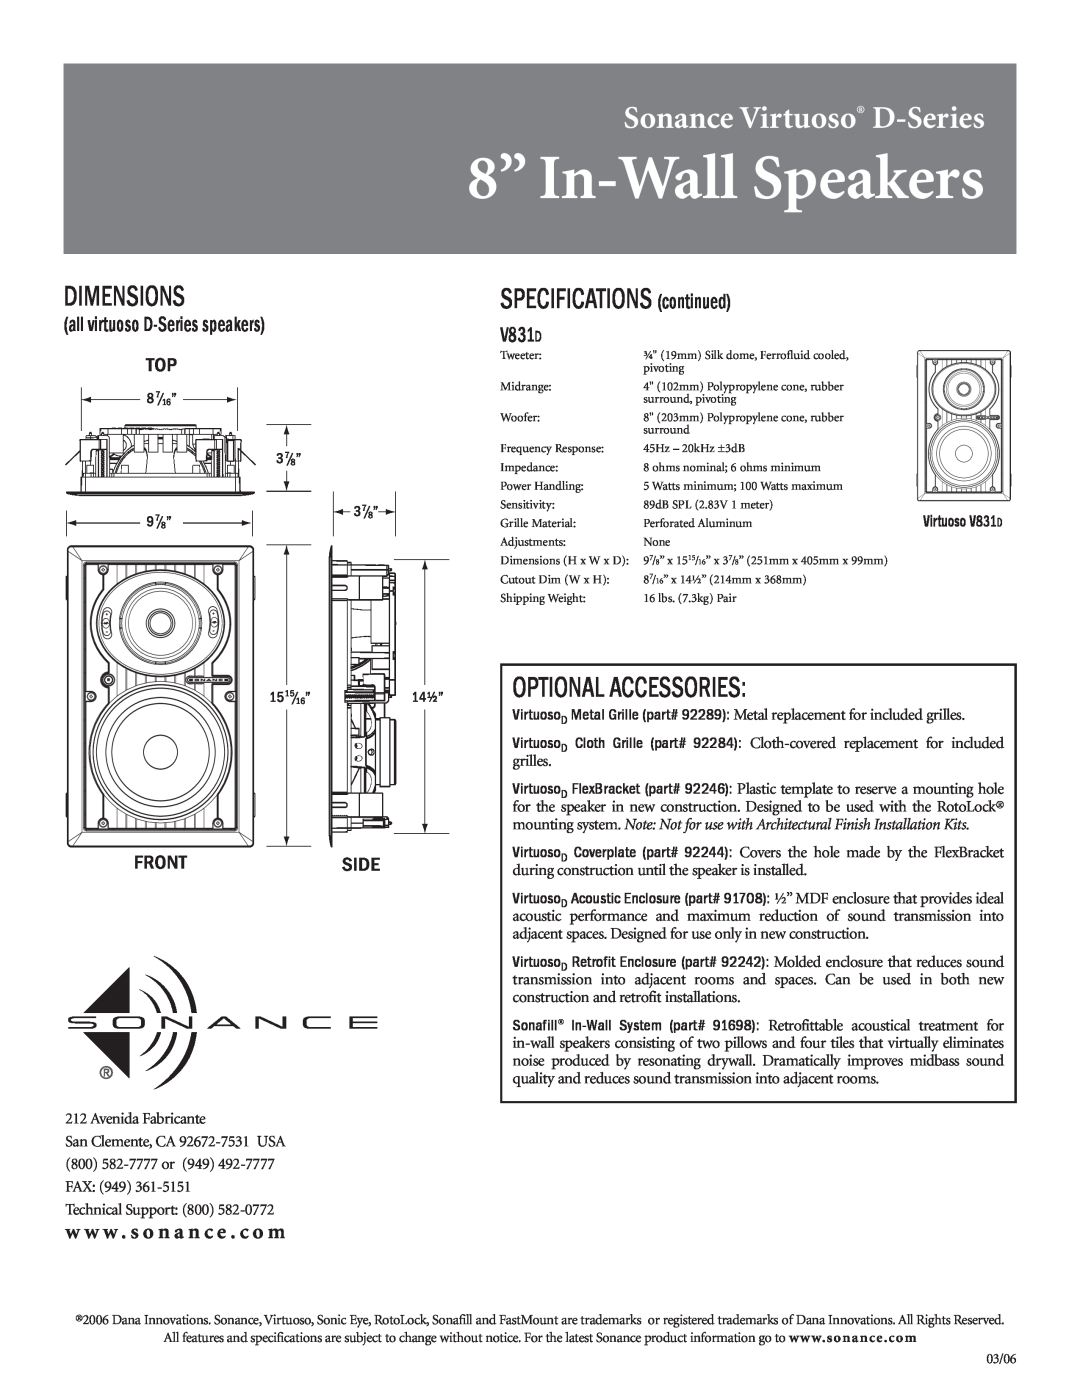 Sonance V834D specifications Dimensions, Optional Accessories, all virtuoso D-Seriesspeakers, V831D, 8” In-WallSpeakers 